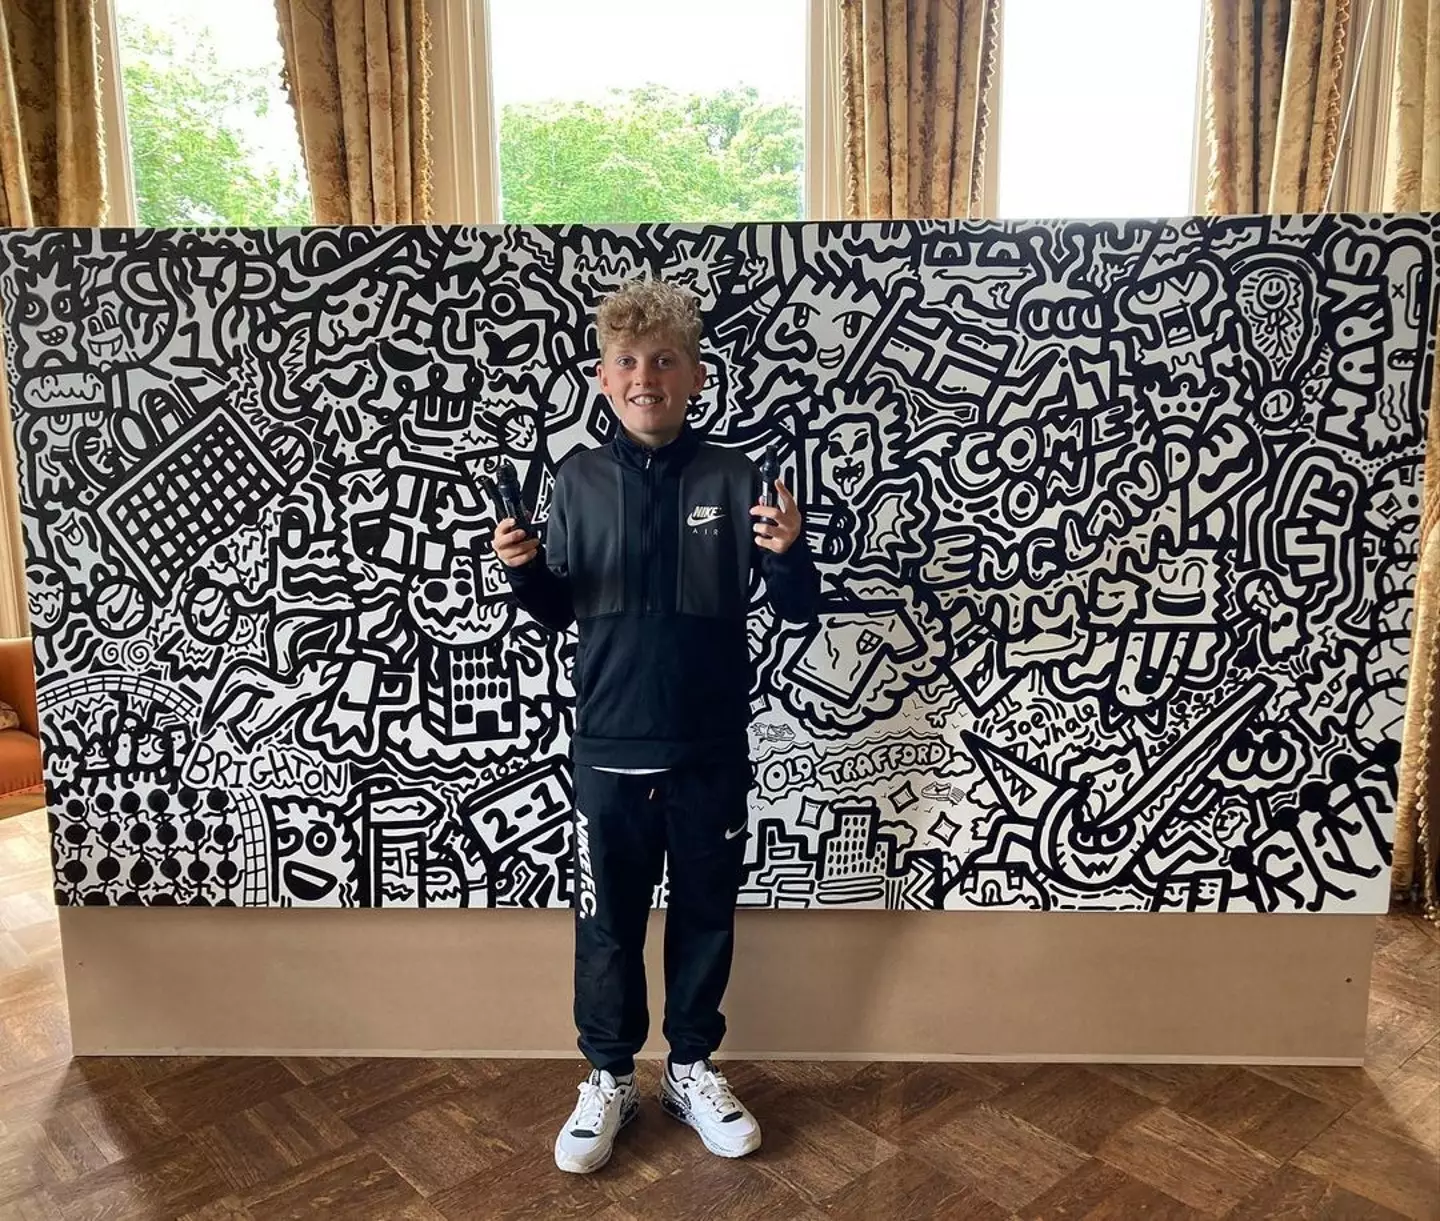 Joe Whale, AKA Doodle Boy, landed a deal with Nike after being told off in school for doodling.